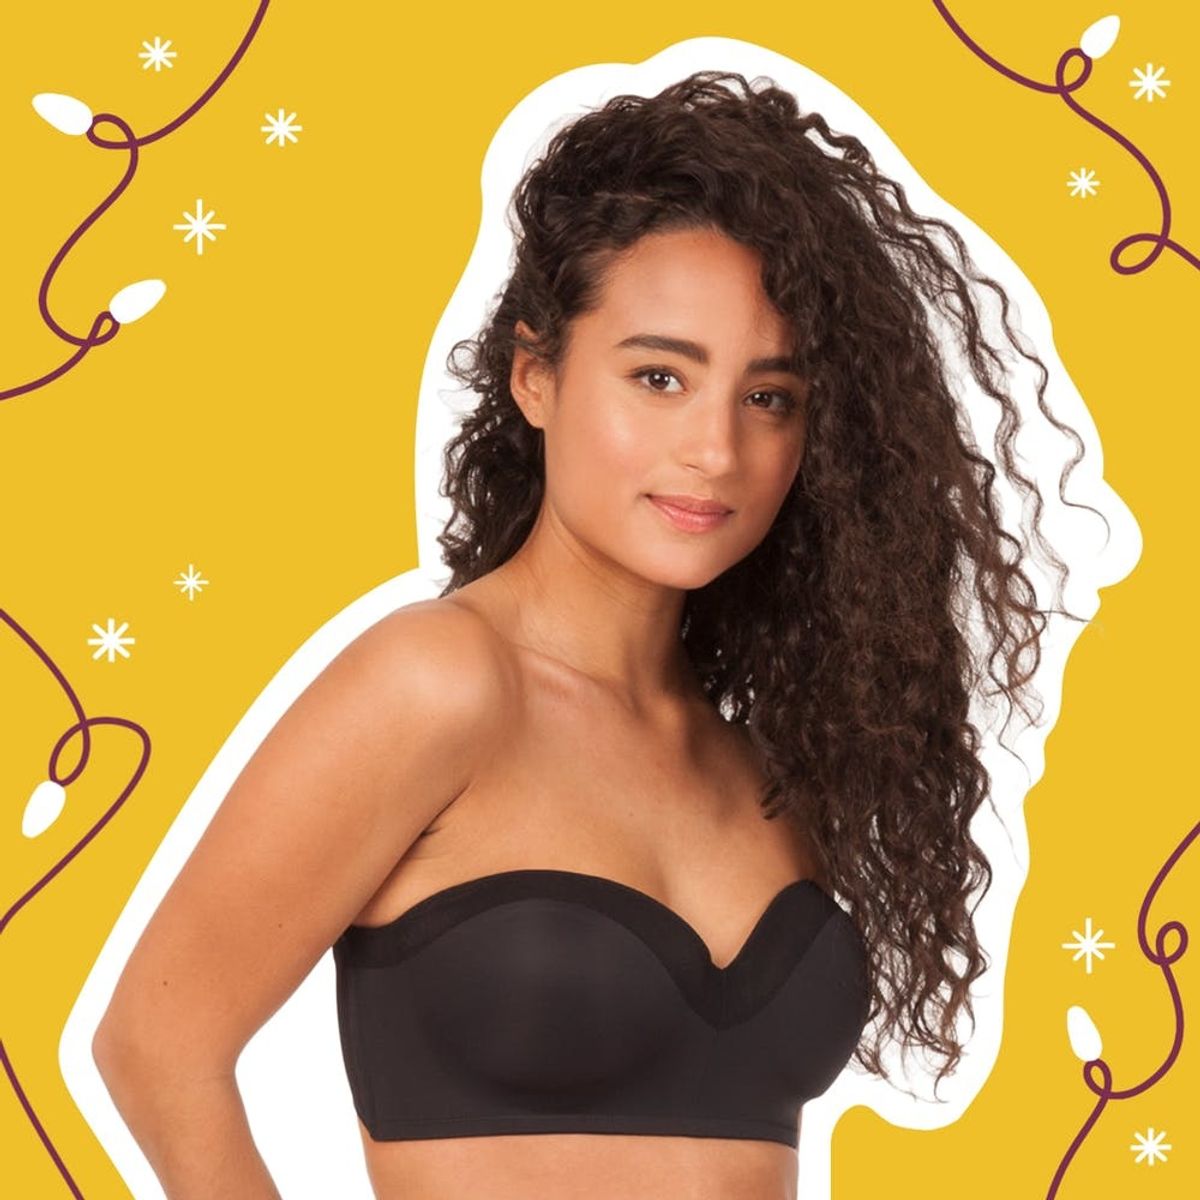 We Tried a Bra: The Best Convertible Bra for Every Holiday Look